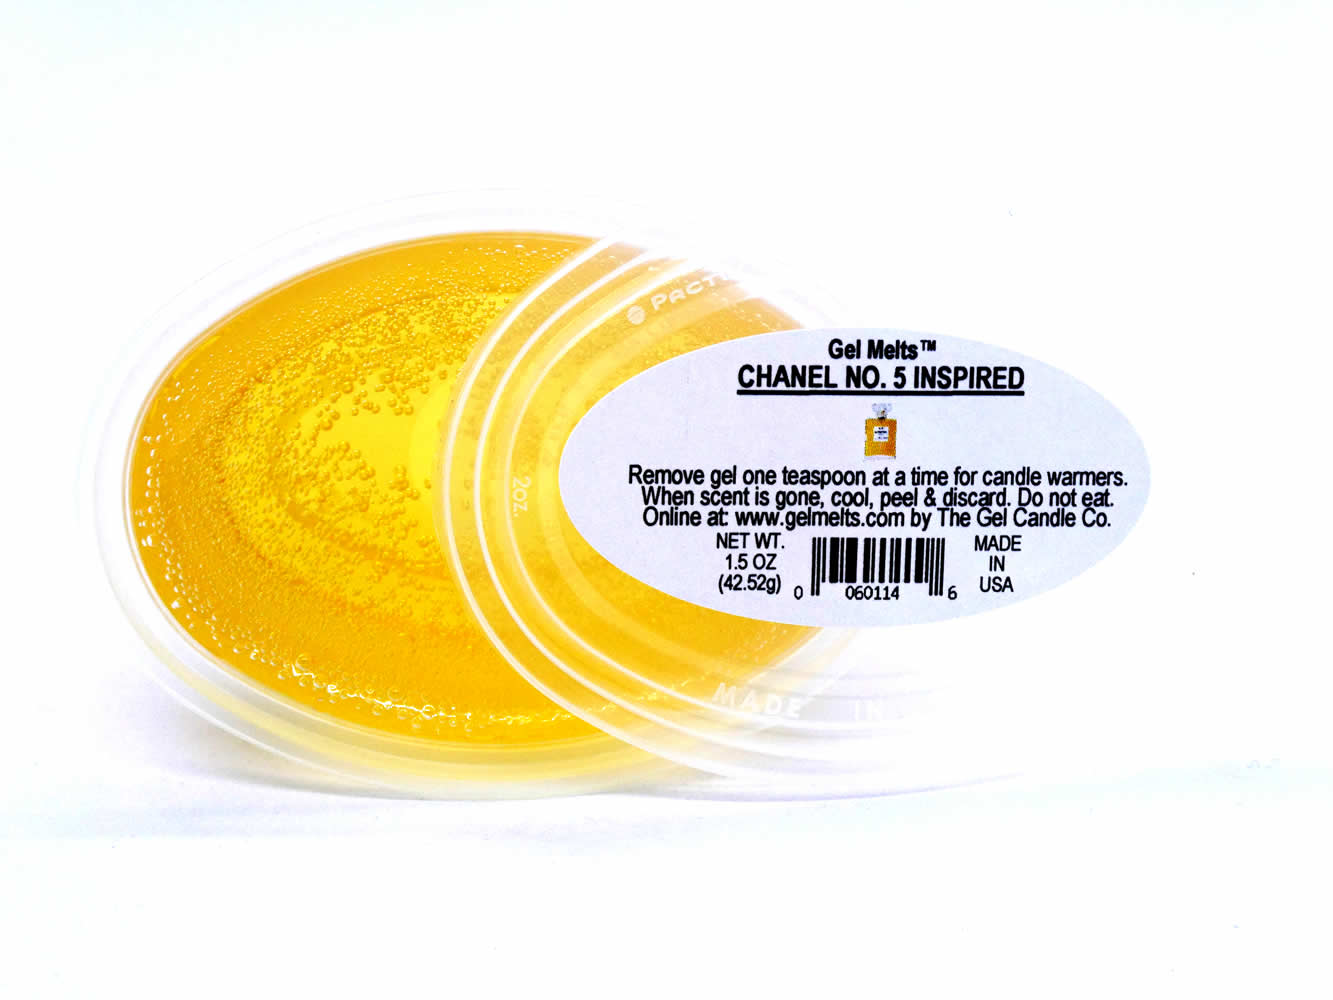 Chanel No. 5 Inspired Scented Gel Melts™ for warmers 3 pack [479